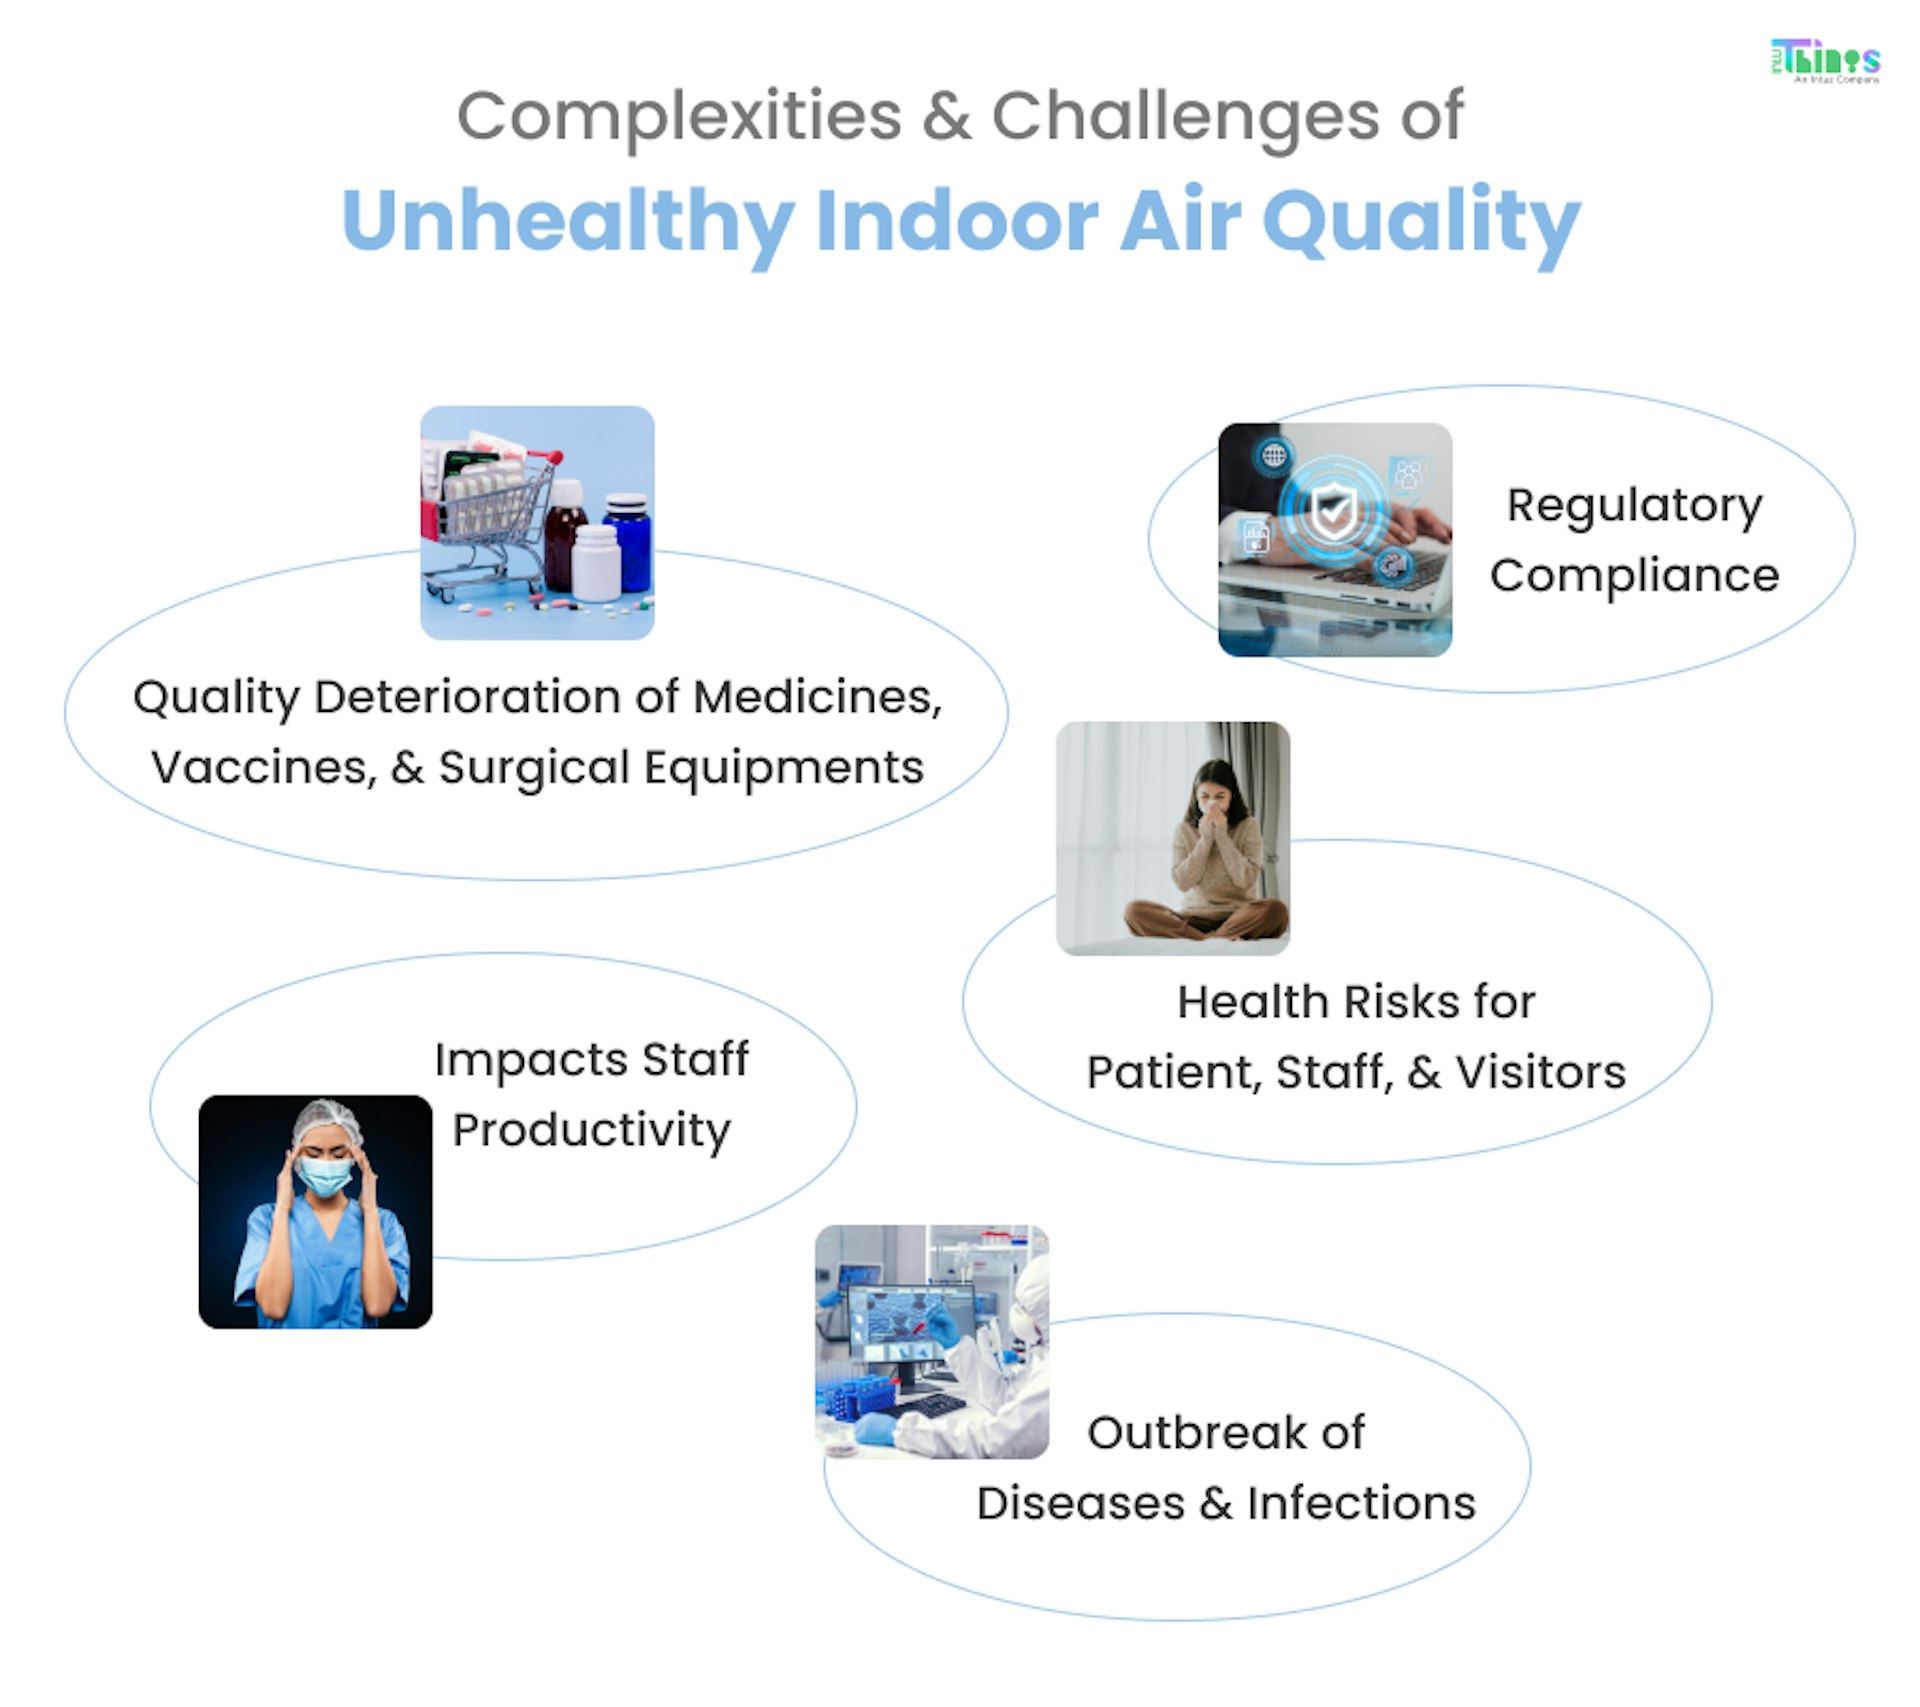 Challenges of unhealthy indoor air quality 